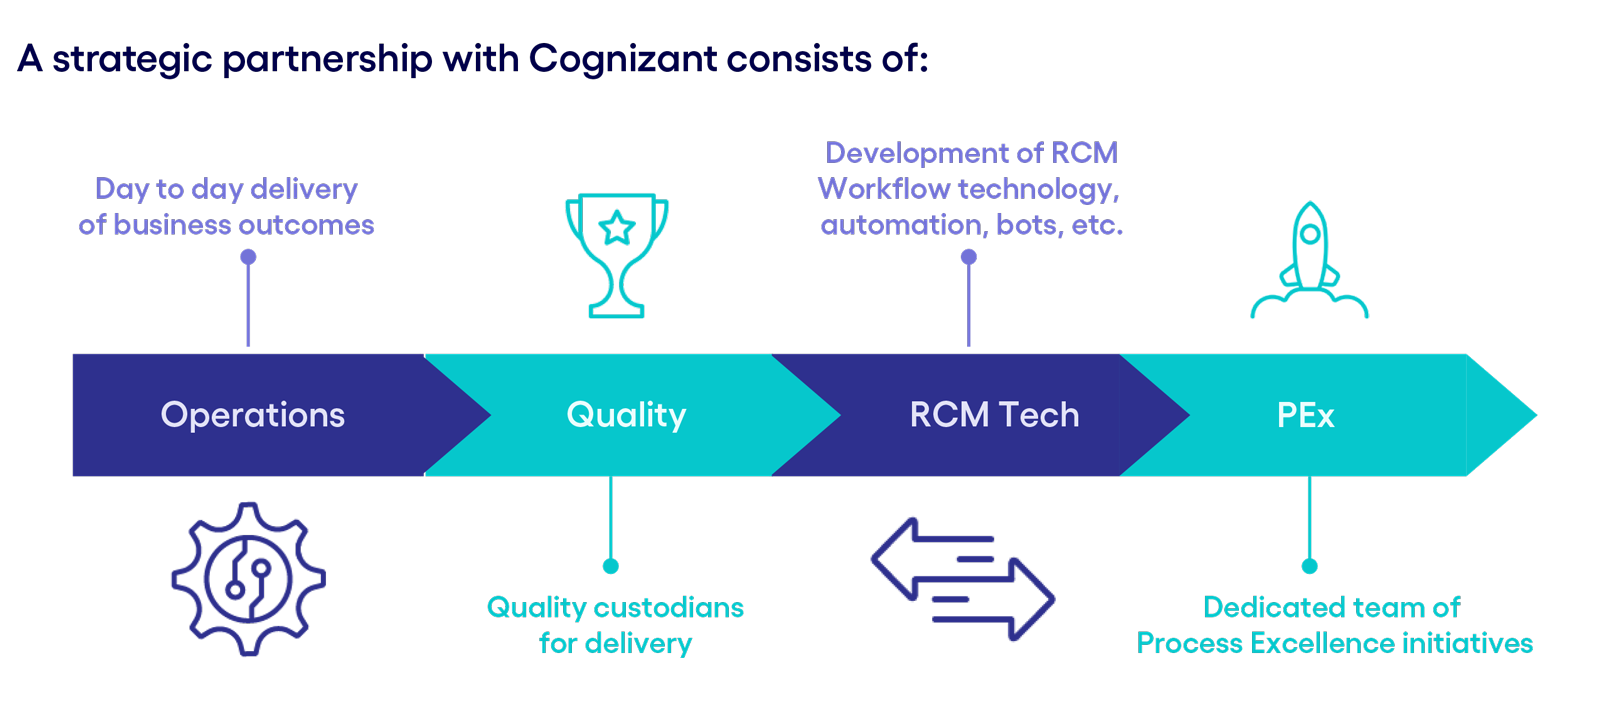 A strategic partnership with Cognizant consists of